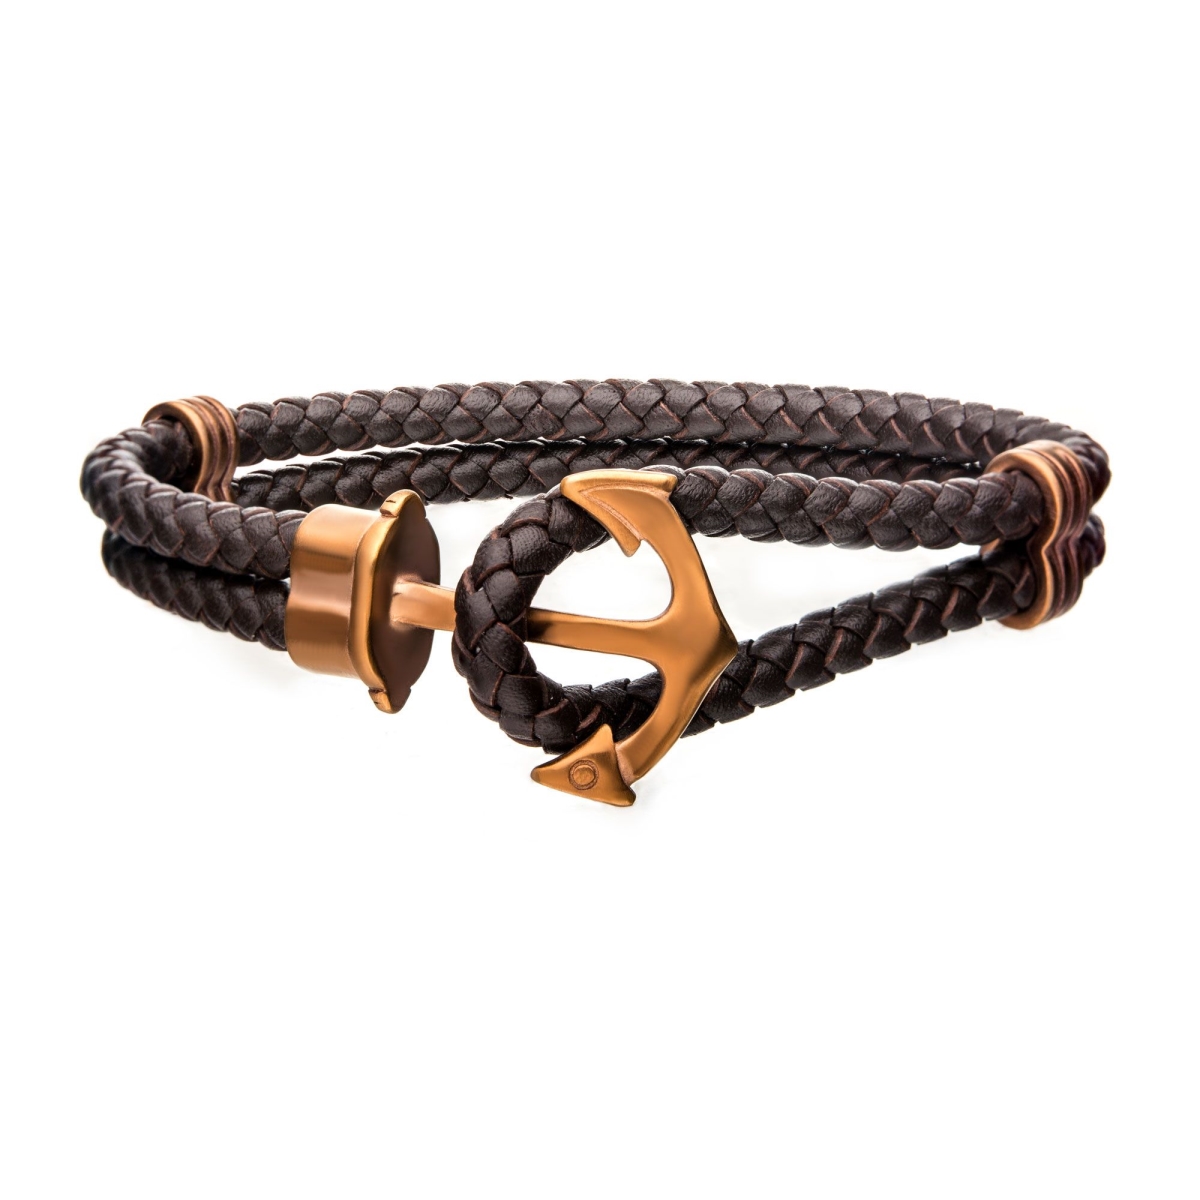 Br19507cap 8.5 In. Mens Anchor Bracelet - Brown Leather With Cappuccino Ip